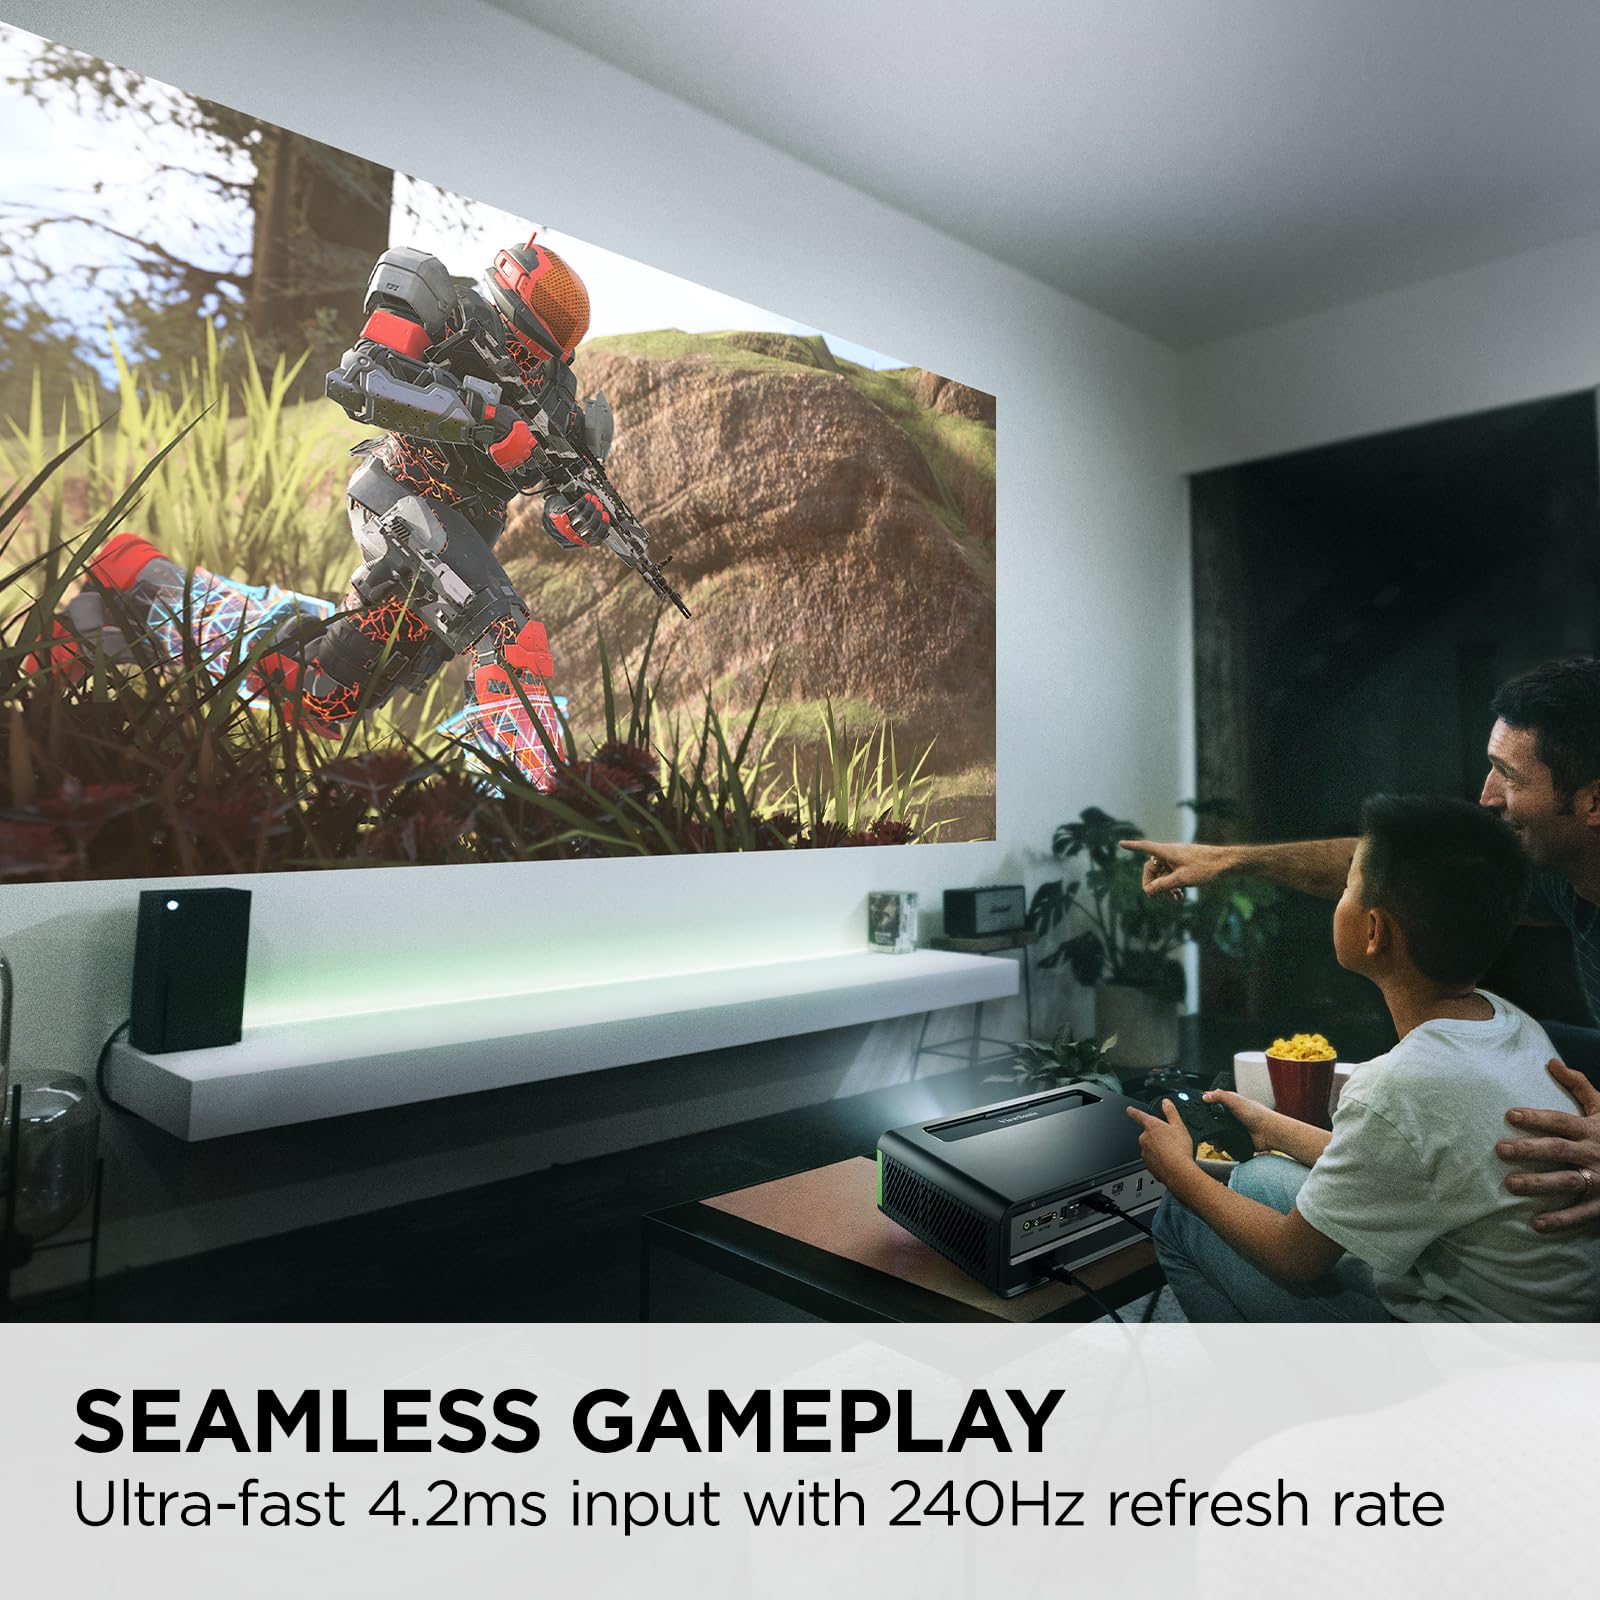 ViewSonic X2-4K UHD Short Throw Projector Designed for Xbox with Cinematic Colors, 4.2ms Response Time, 240 Hz Refresh Rate, 1.2x Optical Zoom, and HDR/HLG Support